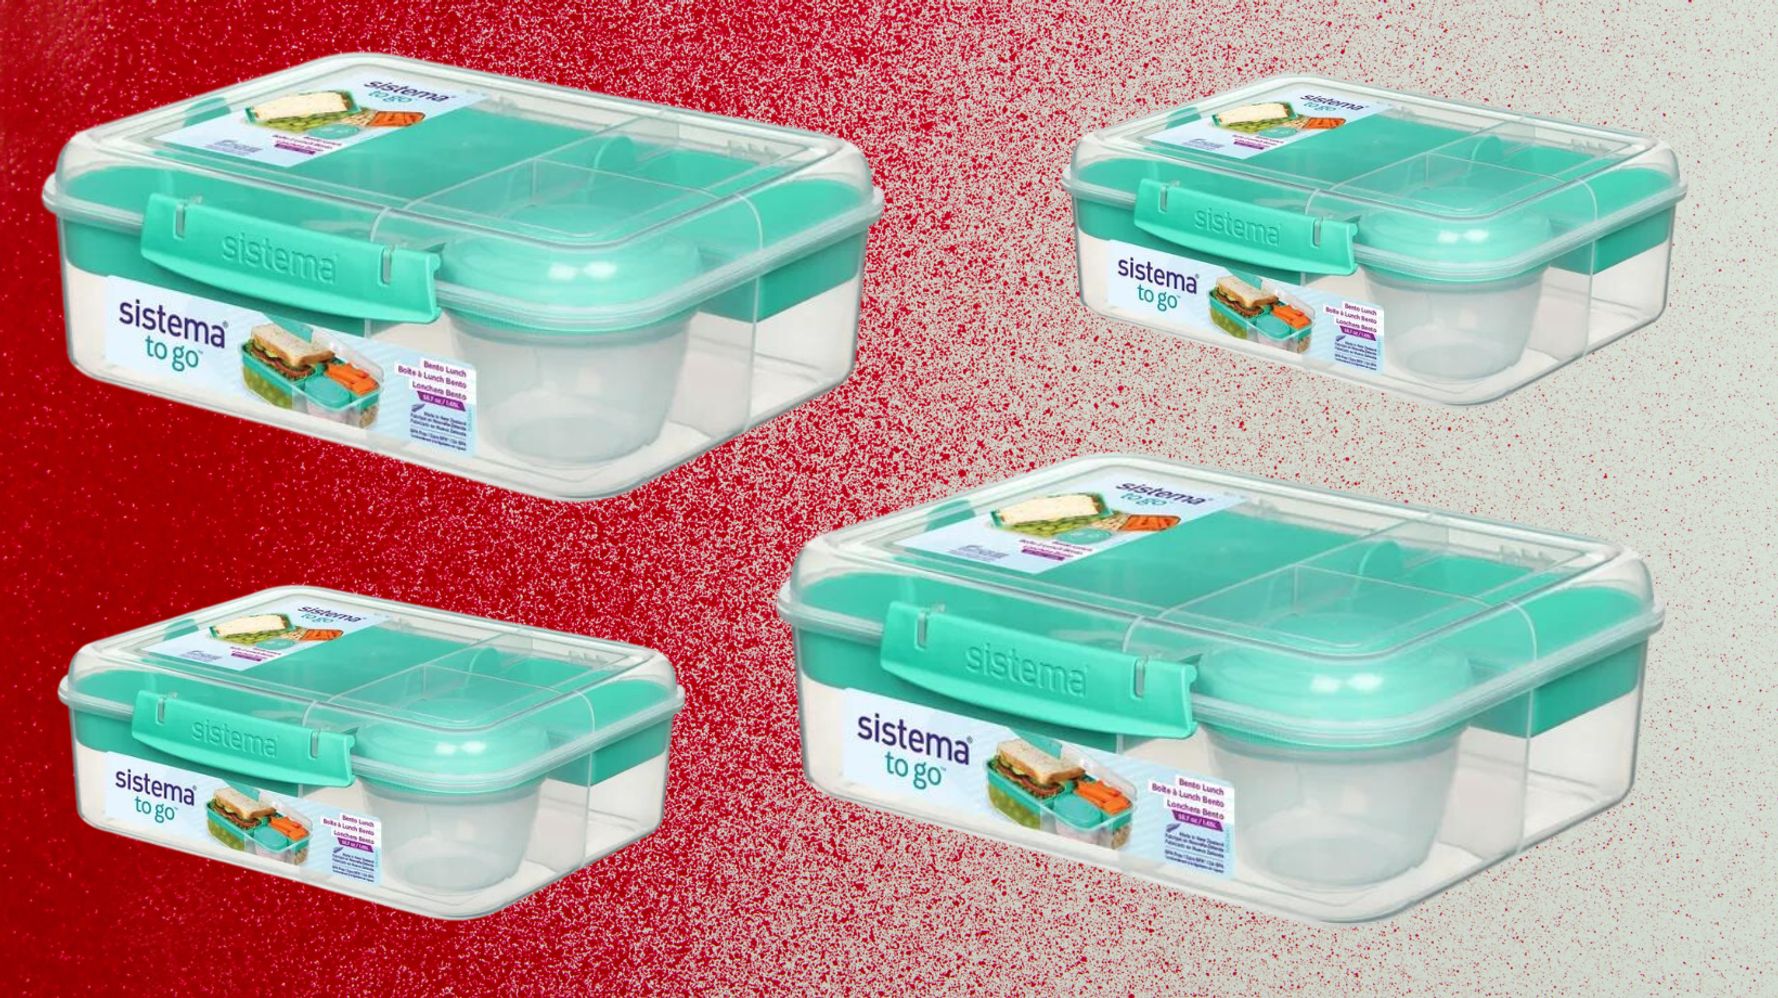 Get The Best Lunch Box For Your Family At Walmart